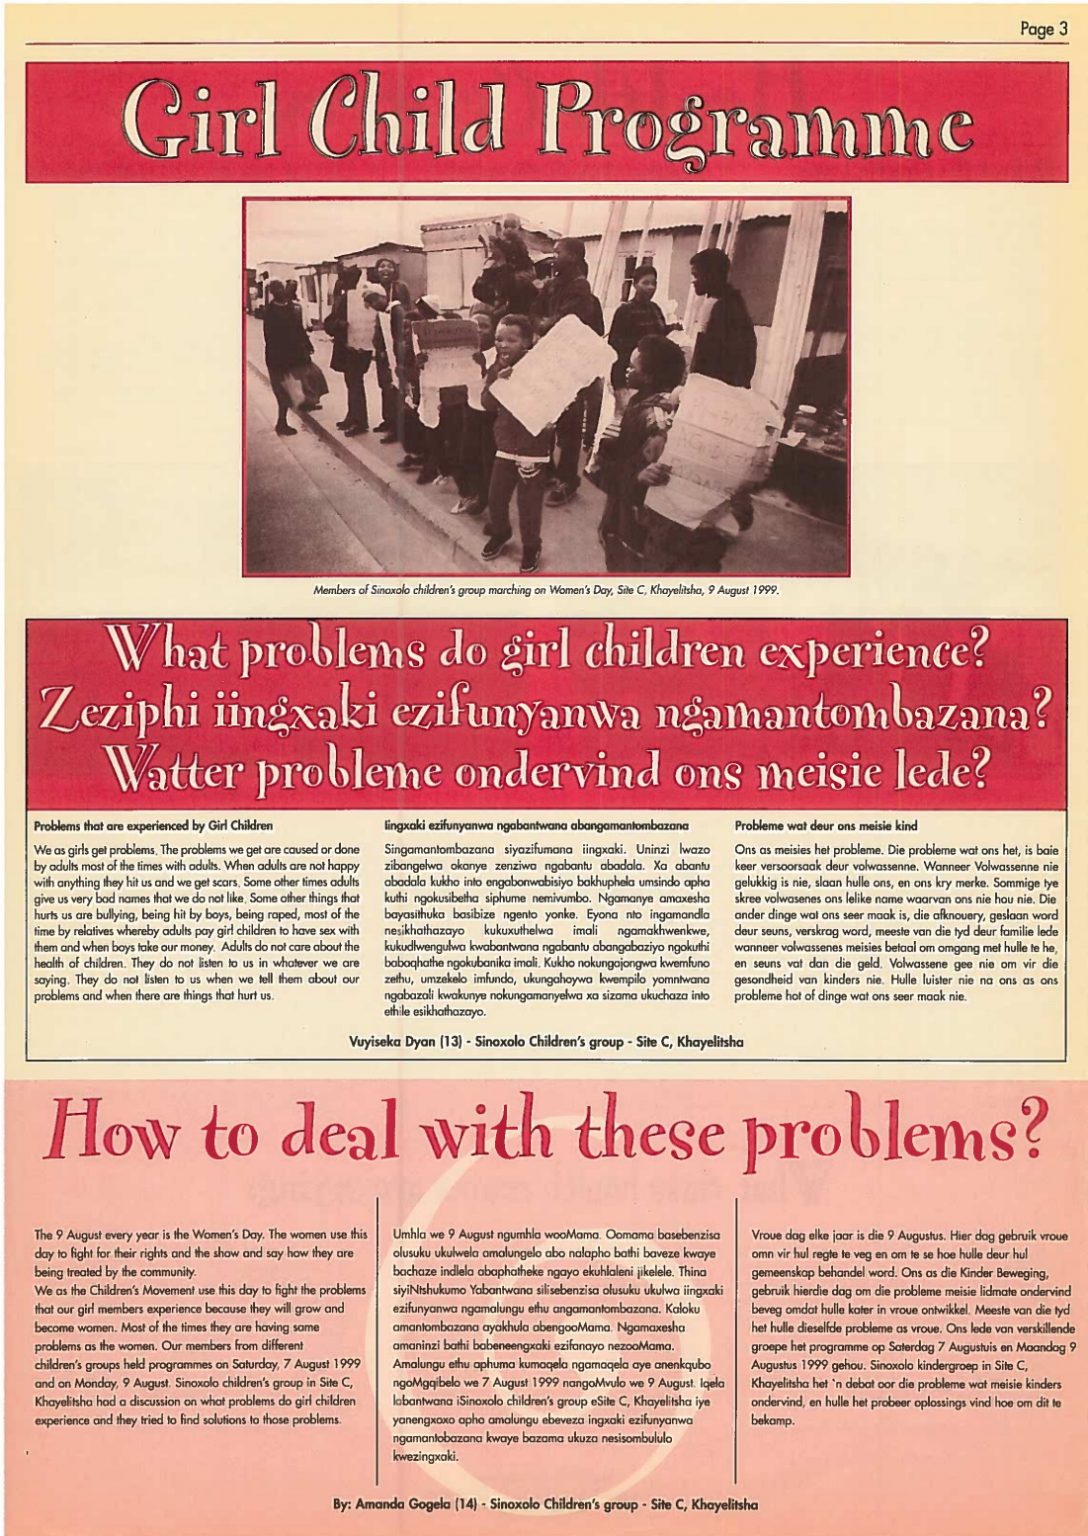 Article on the Girl Child Programme from Voice of the Children, Sept 1999.